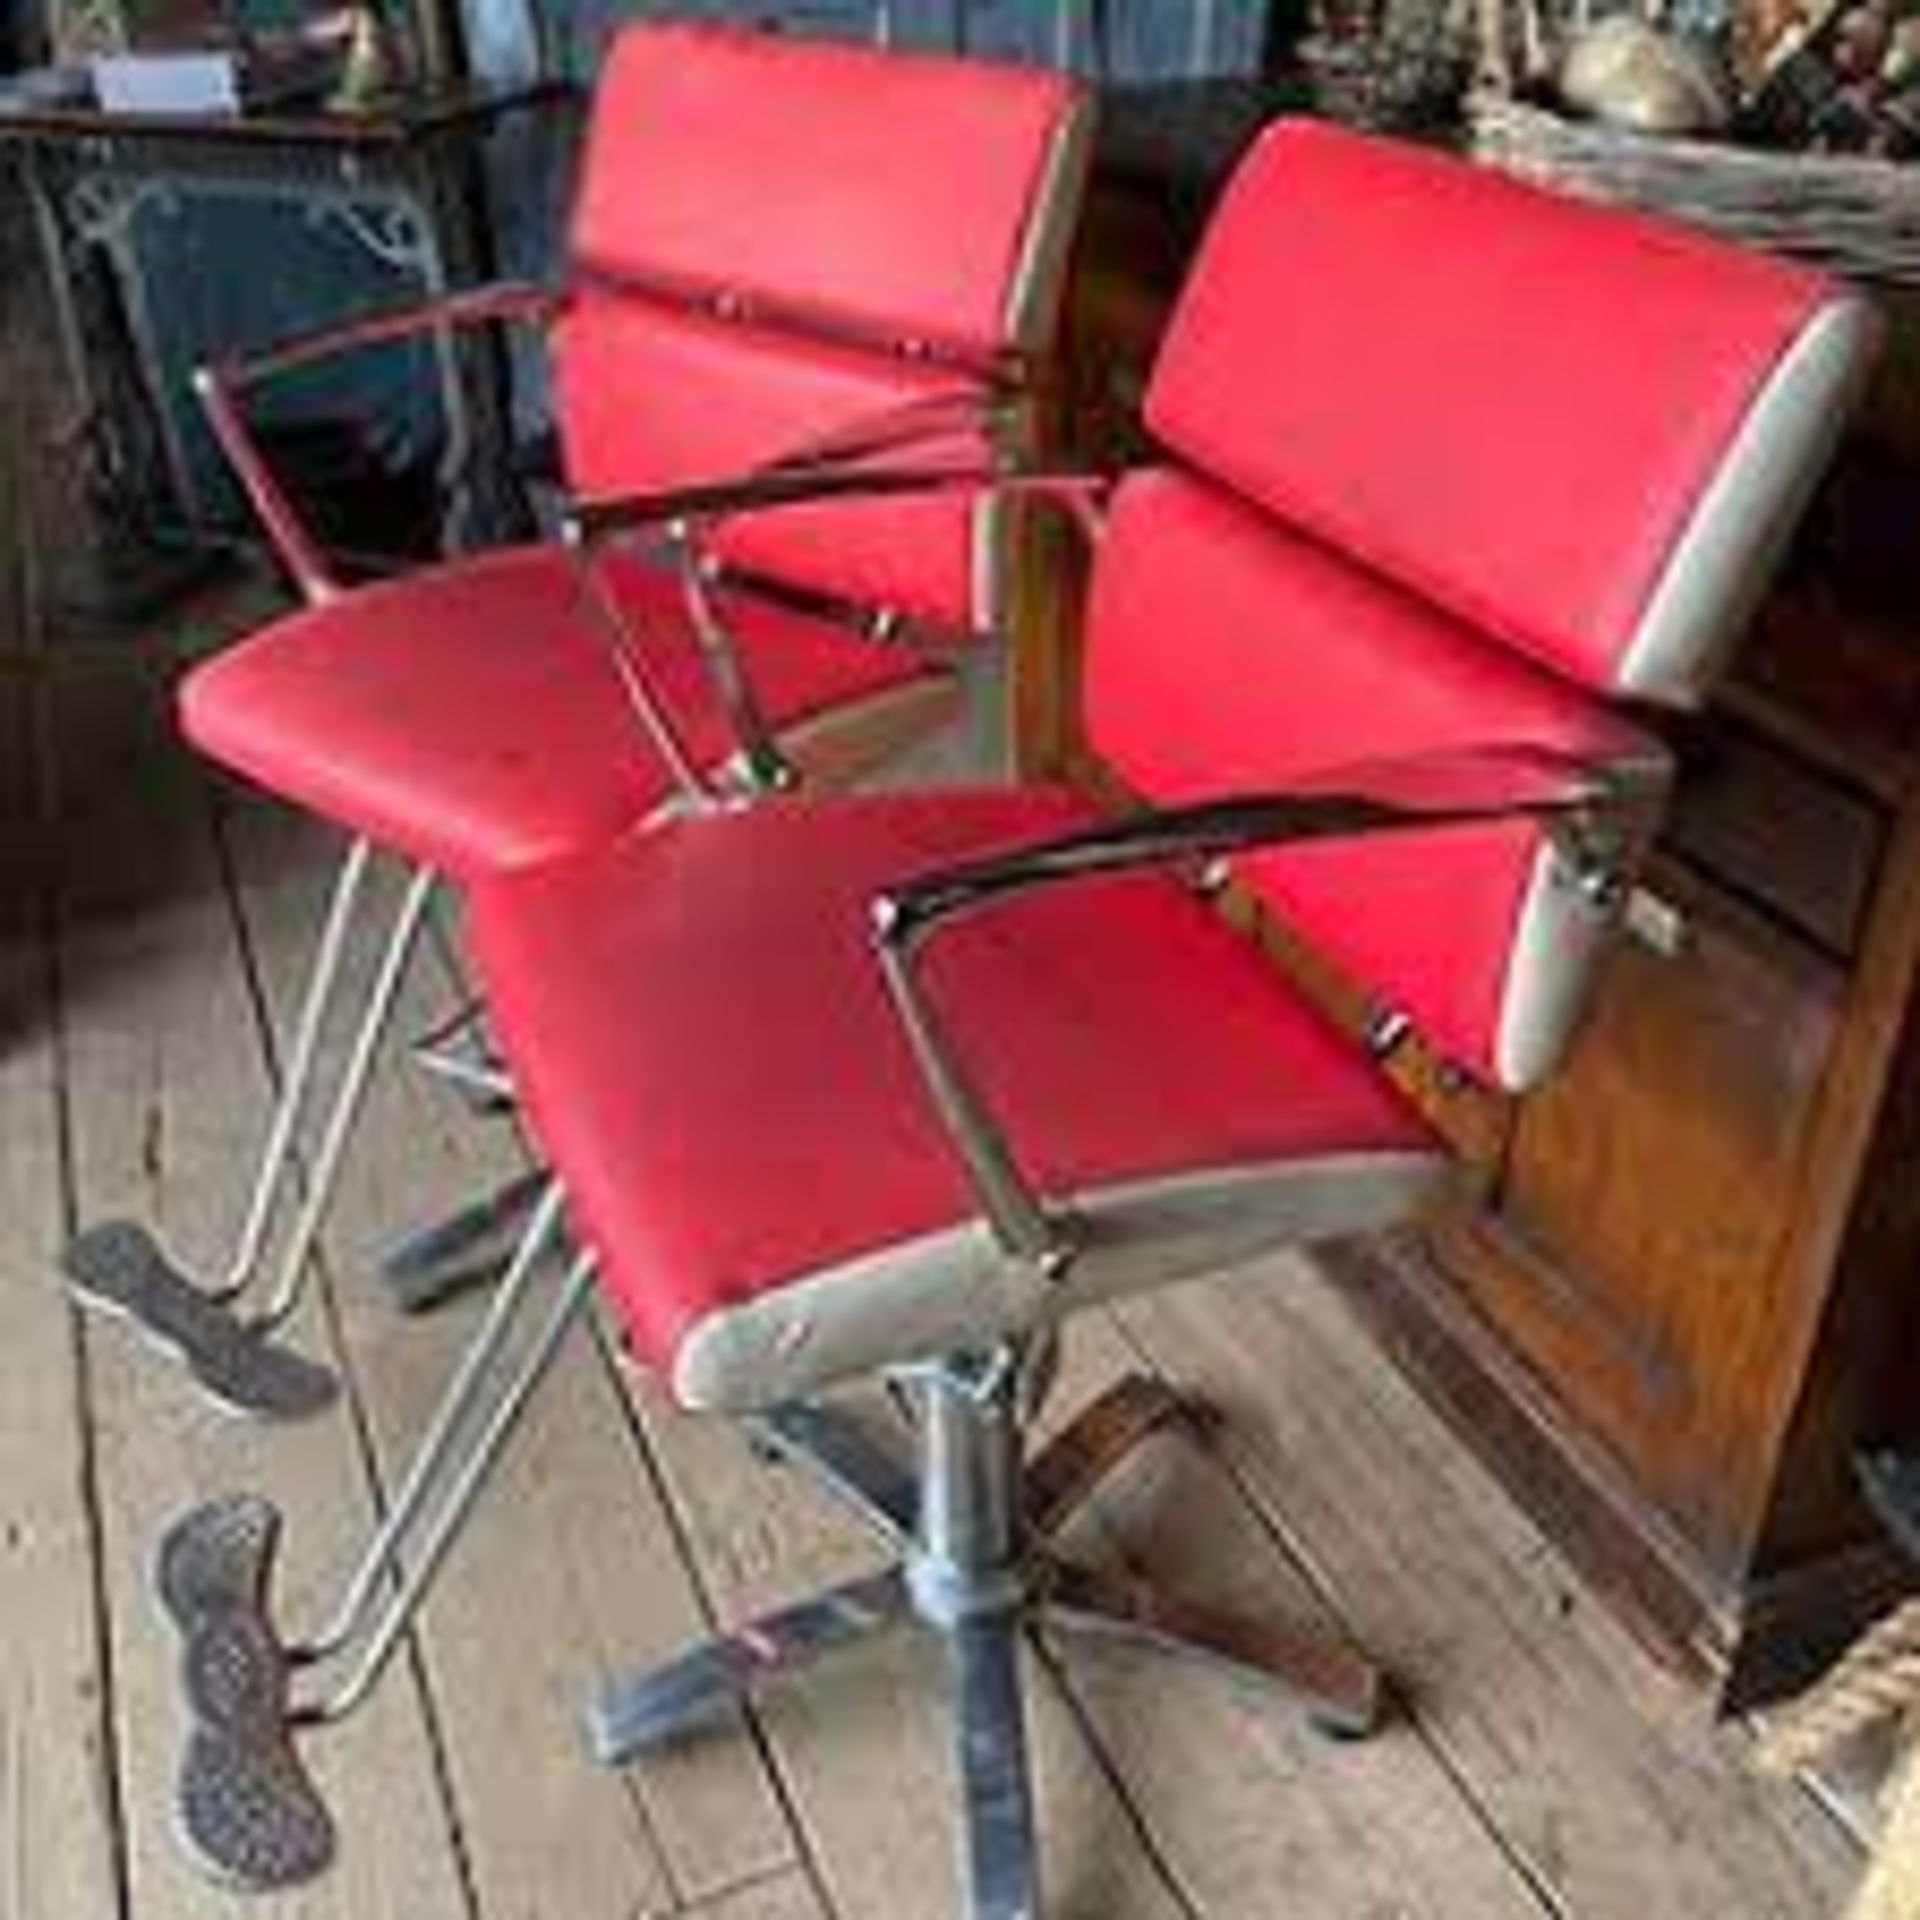 babers chairs - Image 2 of 2